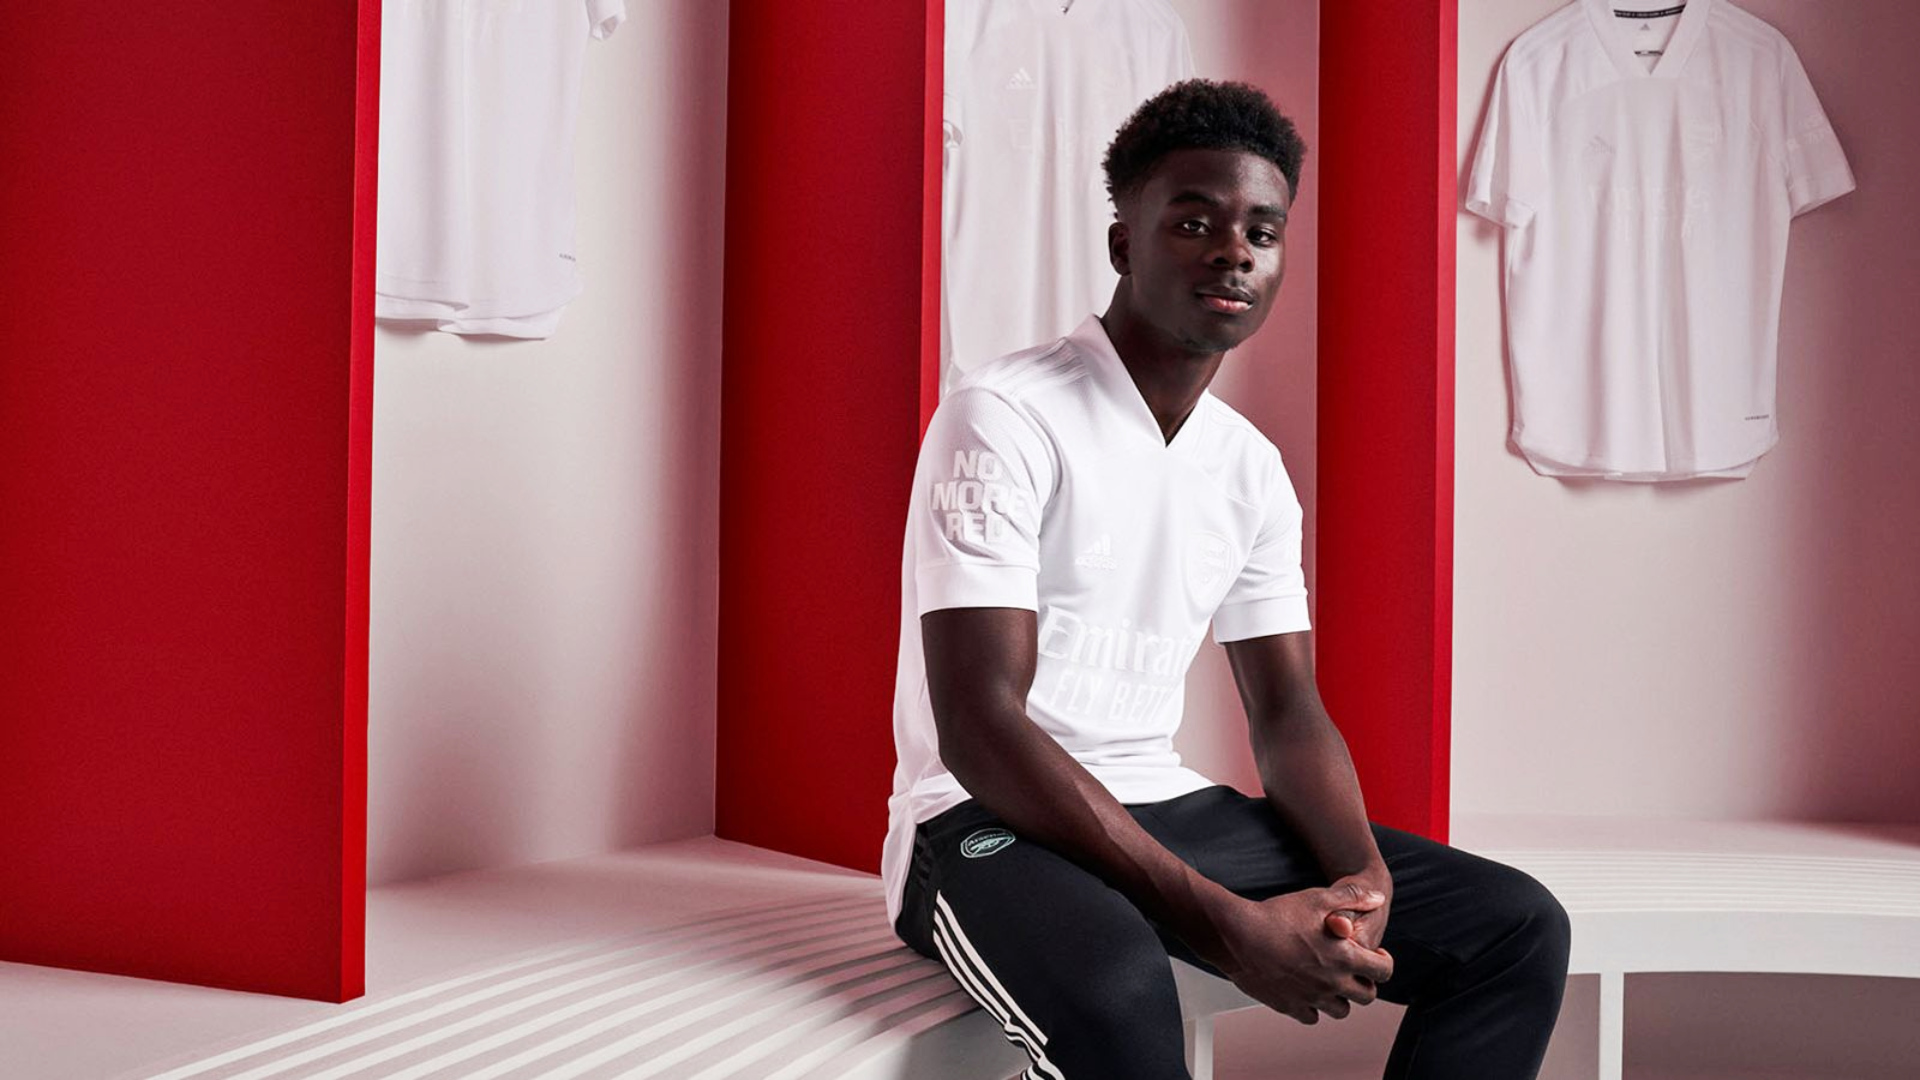 Arsenal’s No More Red campaign has a powerful anti-knife crime message